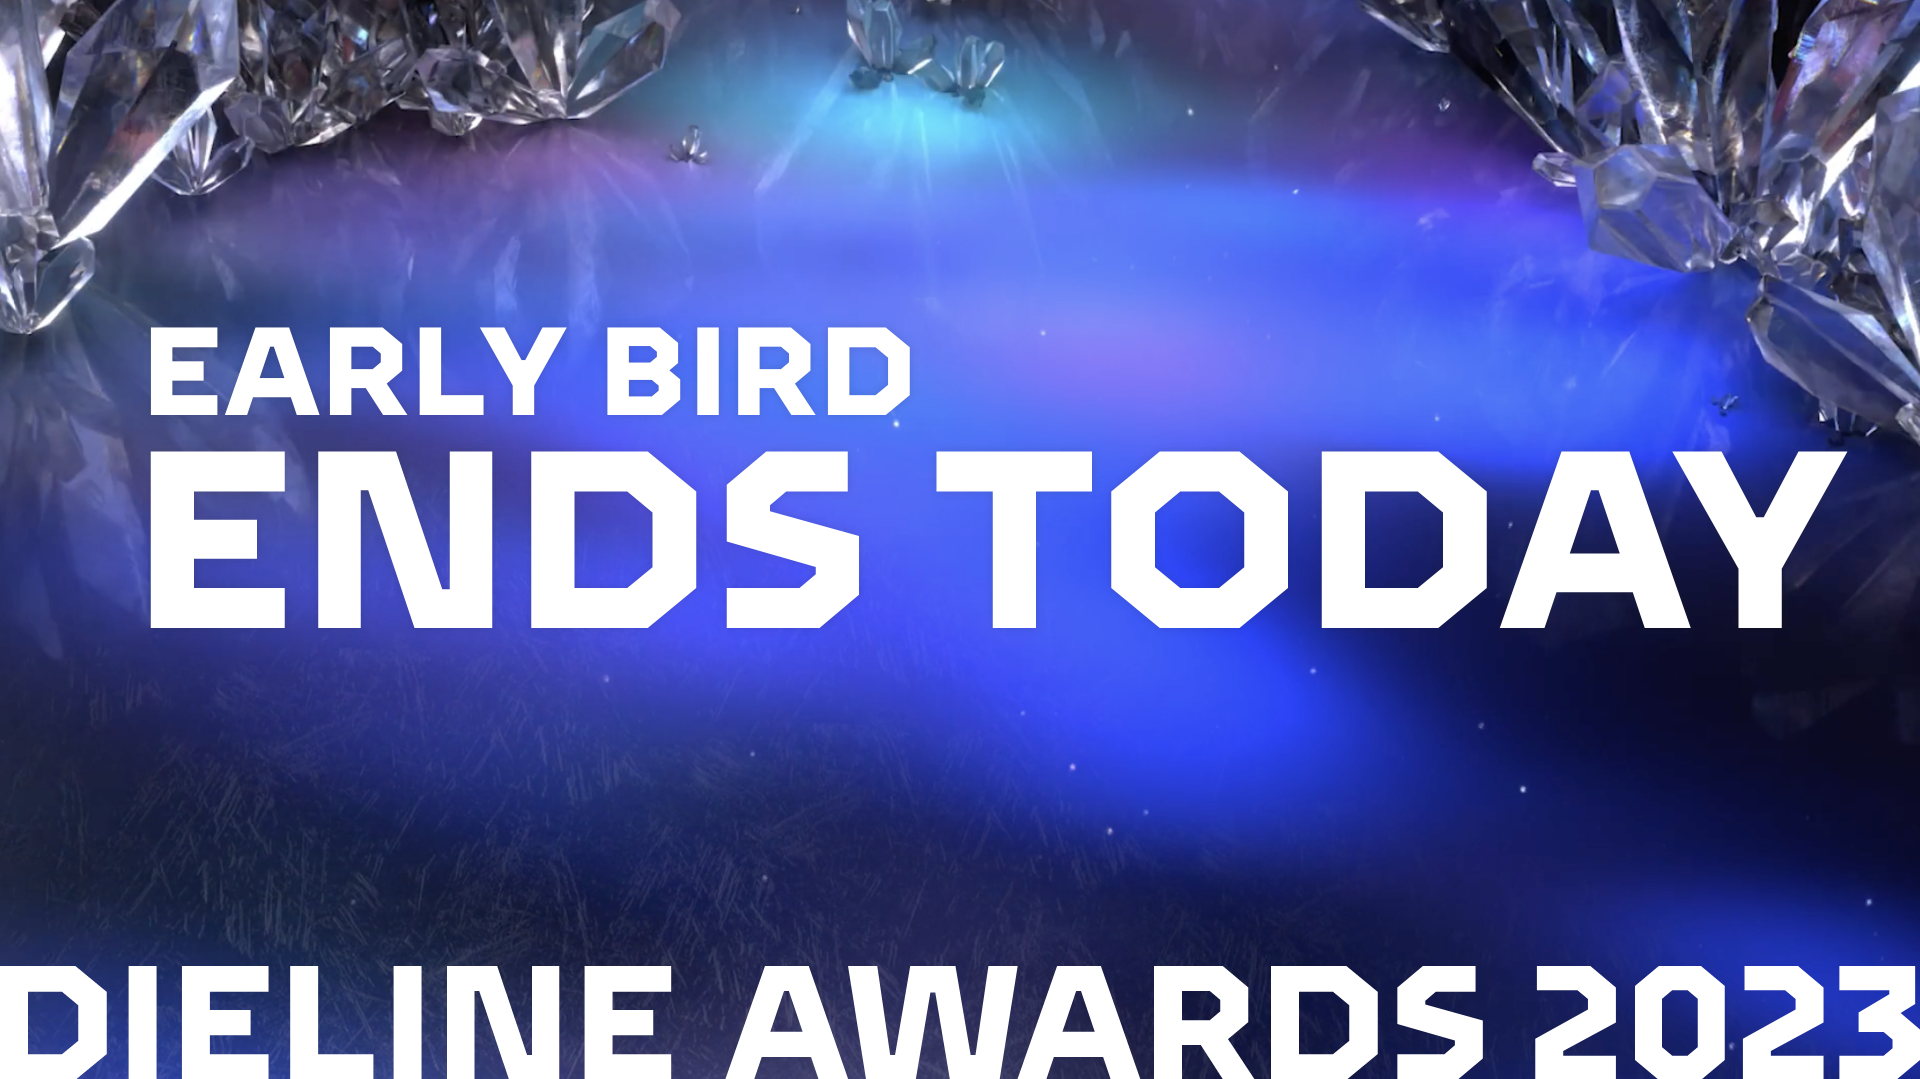 Early Bird Rate for Dieline Awards 2023 Ends TODAY